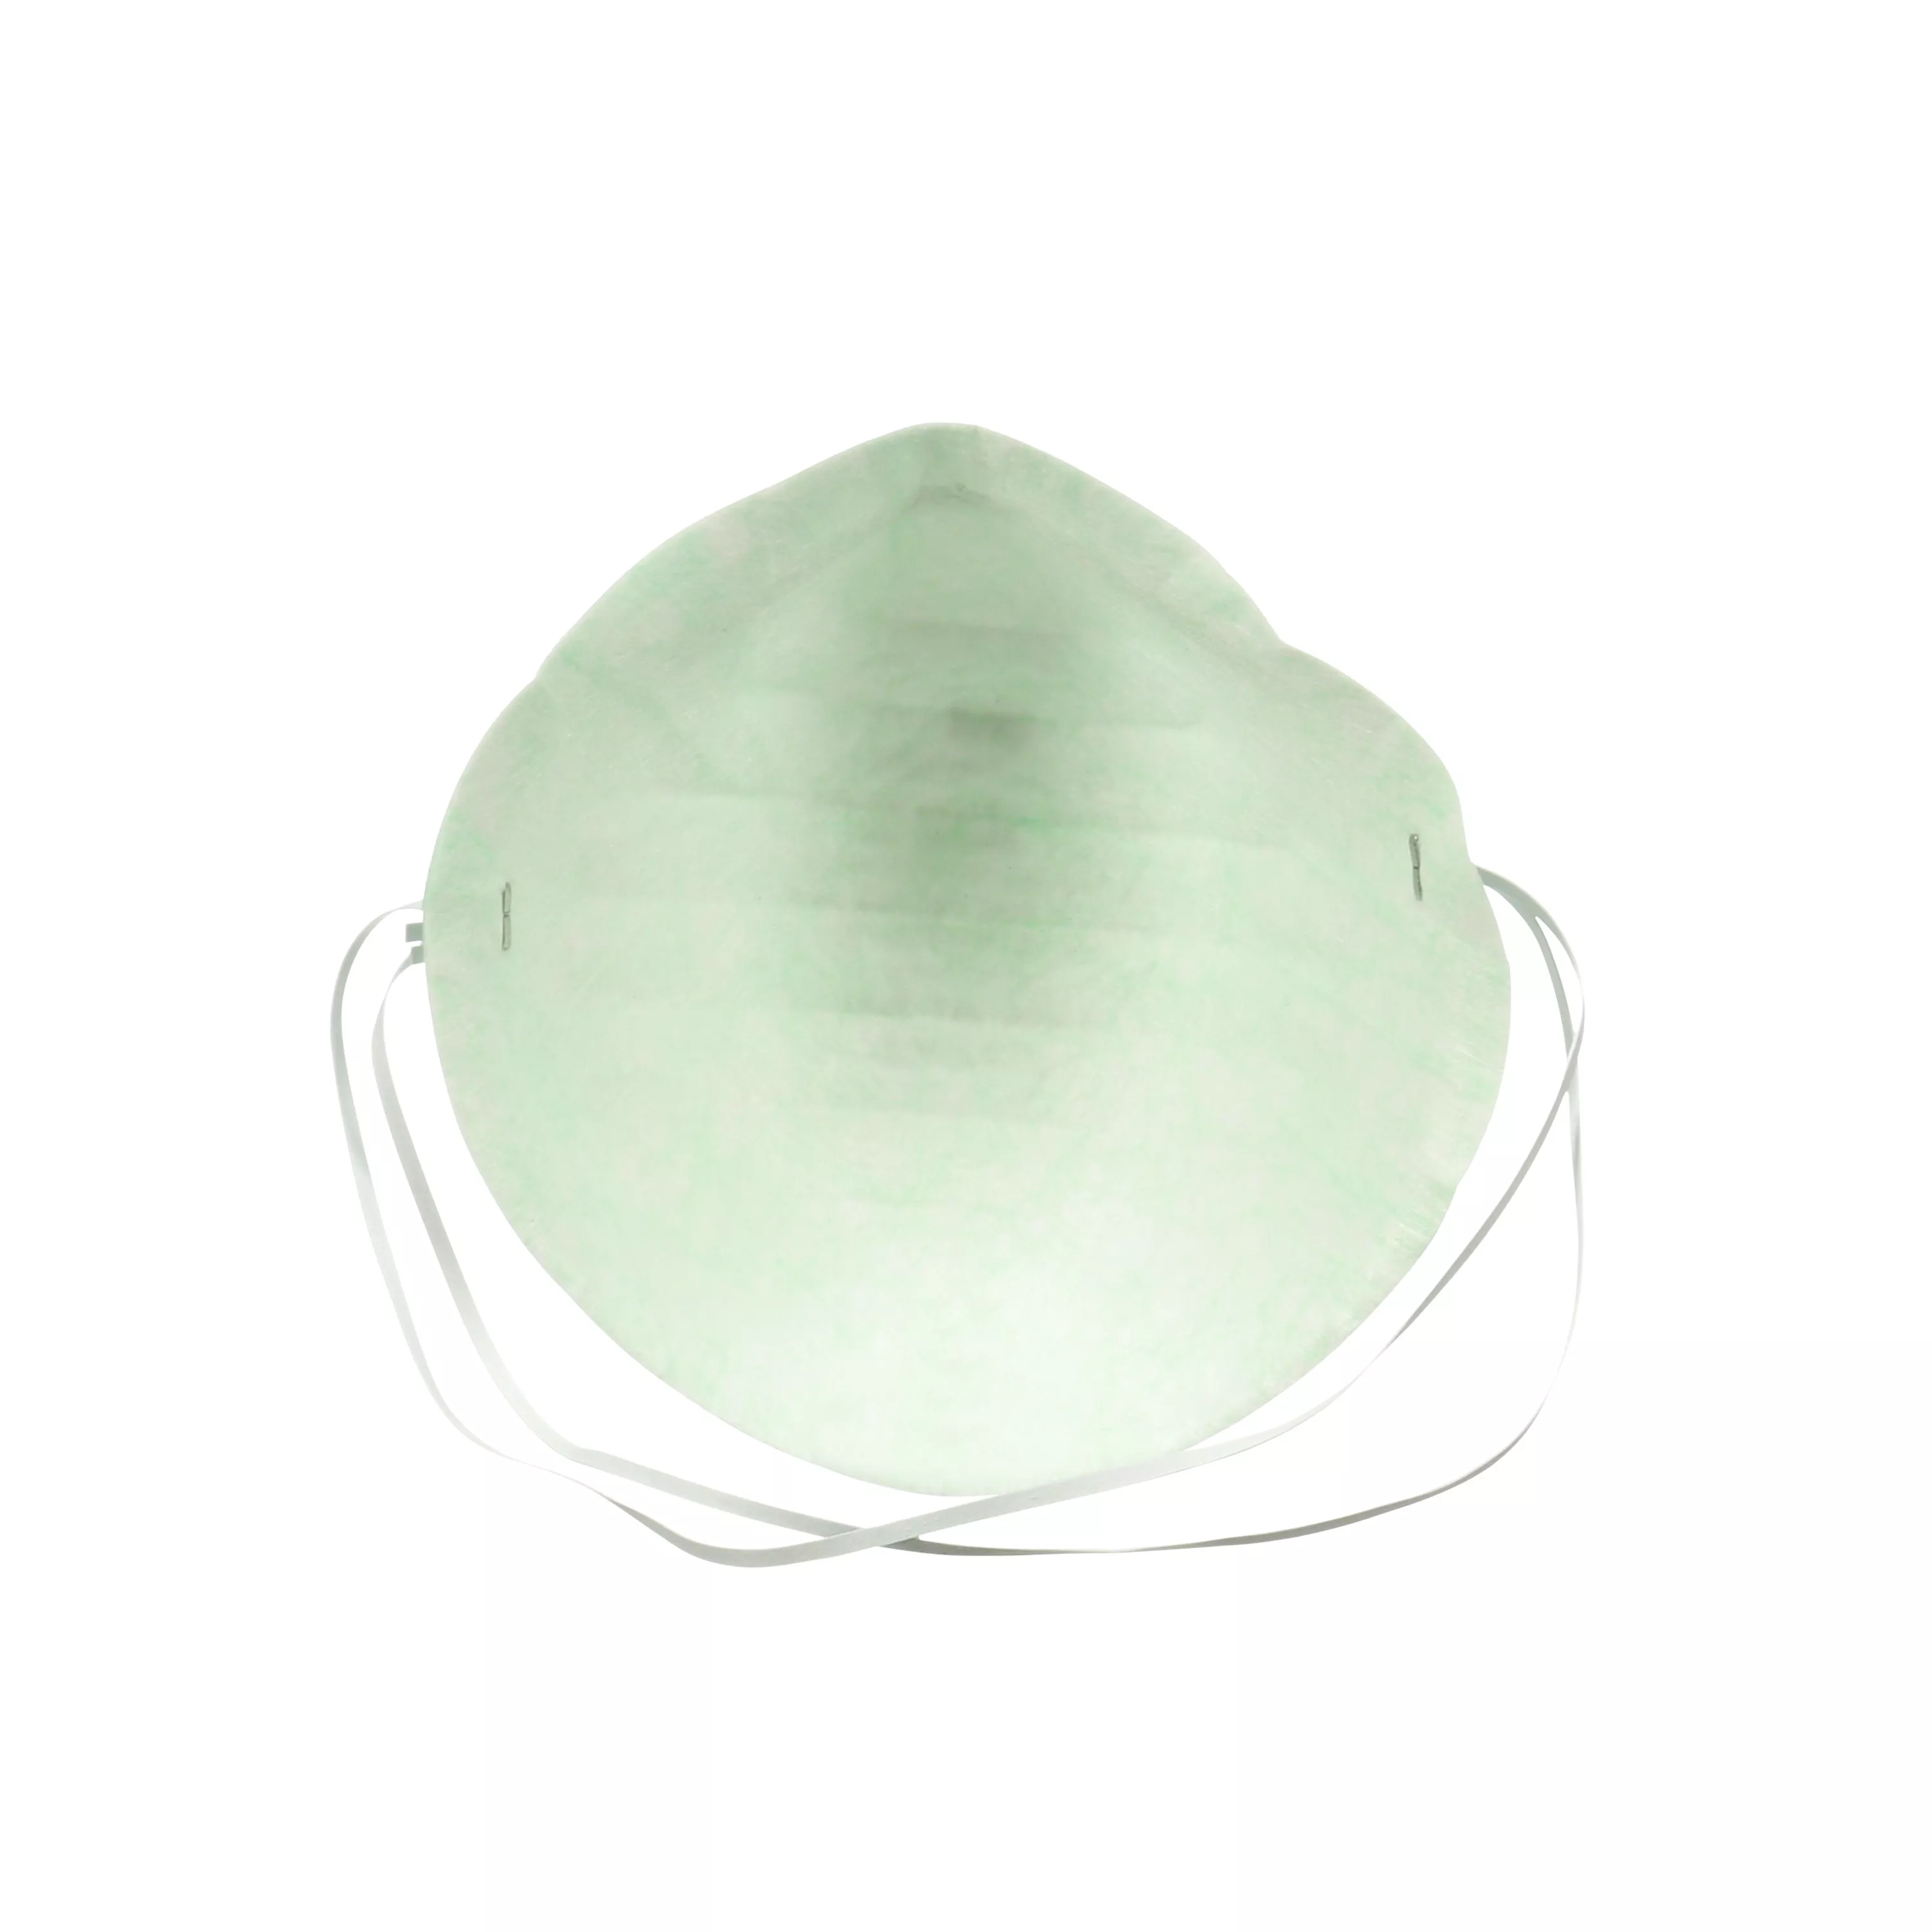 SKU 7100159226 | 3M™ Home Dust Mask 8661P5-DC